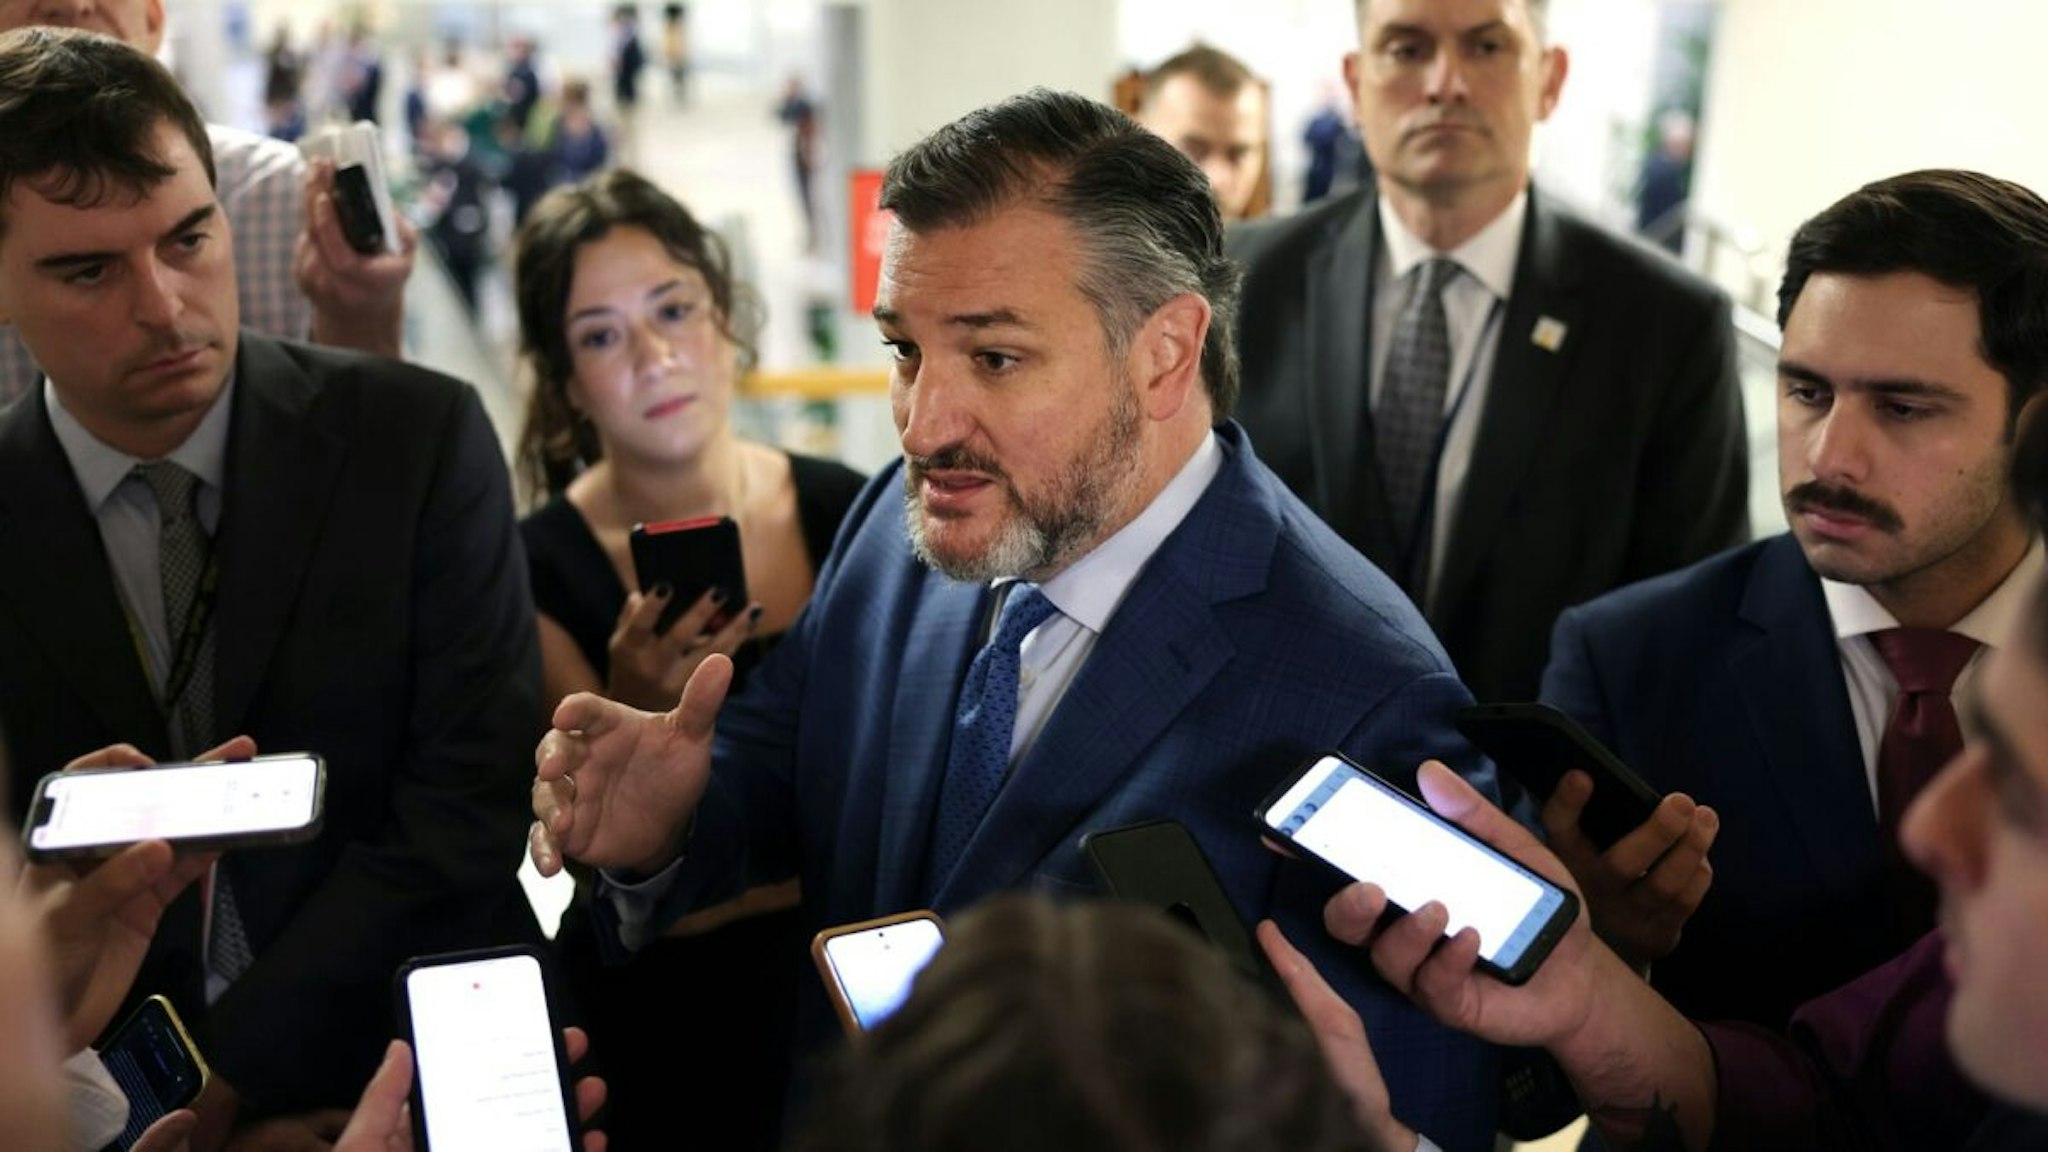 WASHINGTON, DC - DECEMBER 06: U.S. Sen. Ted Cruz (R-TX) speaks to reporters on his way to the Senate weekly policy luncheons, at the U.S. Capitol on December 06, 2022 in Washington, DC.